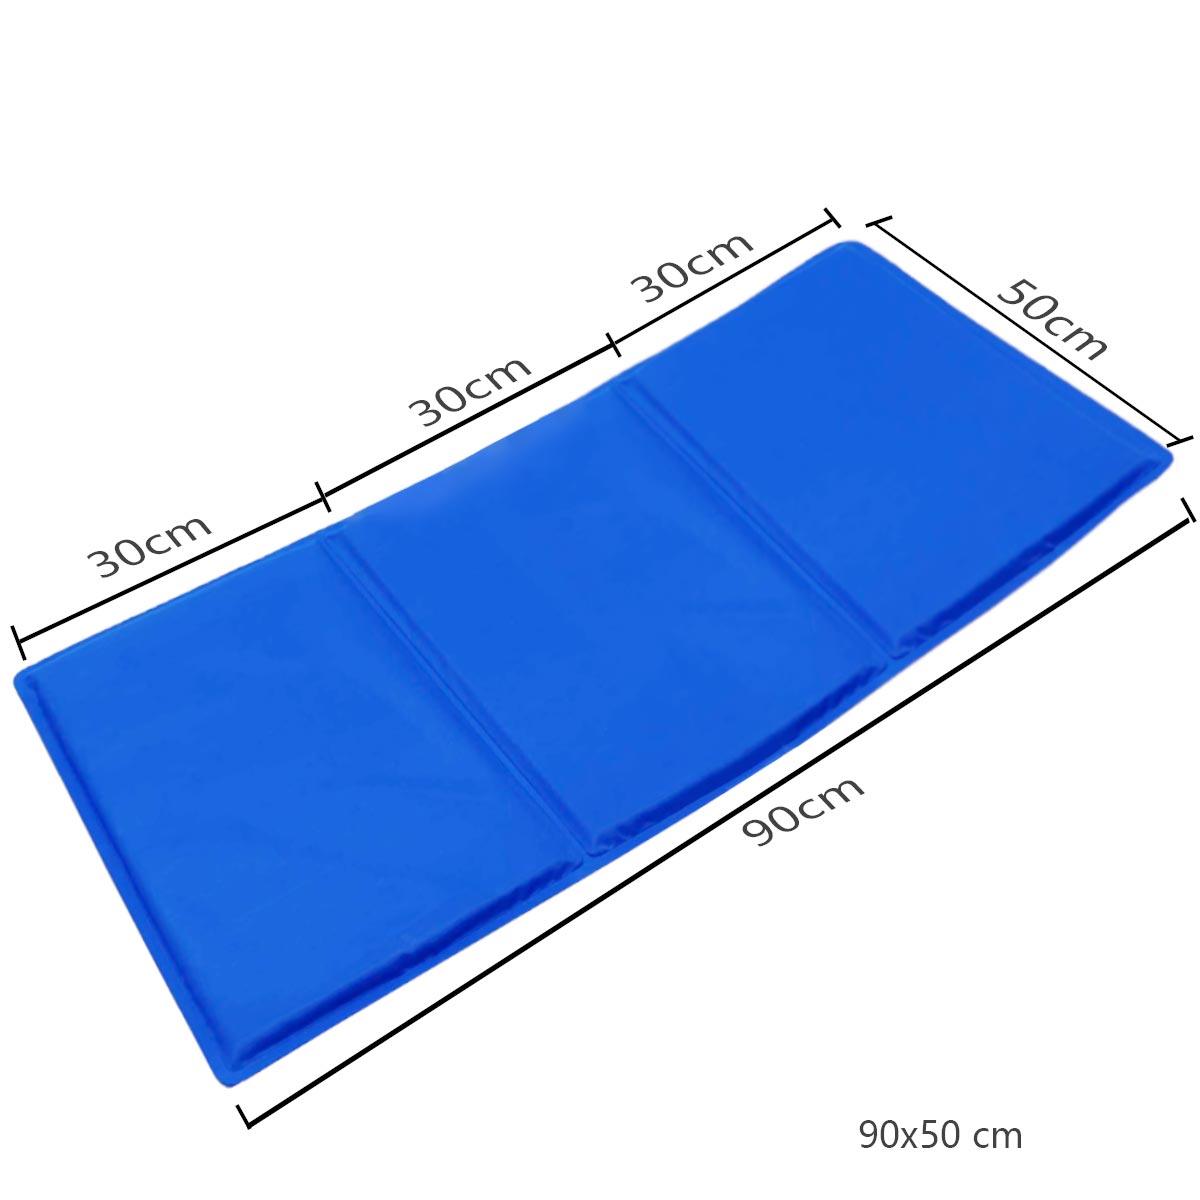 Pet Cool Gel Mat Dog Cat Bed Non-Toxic Cooling Cool Summer Pad 6 Sizes Sparesbarn